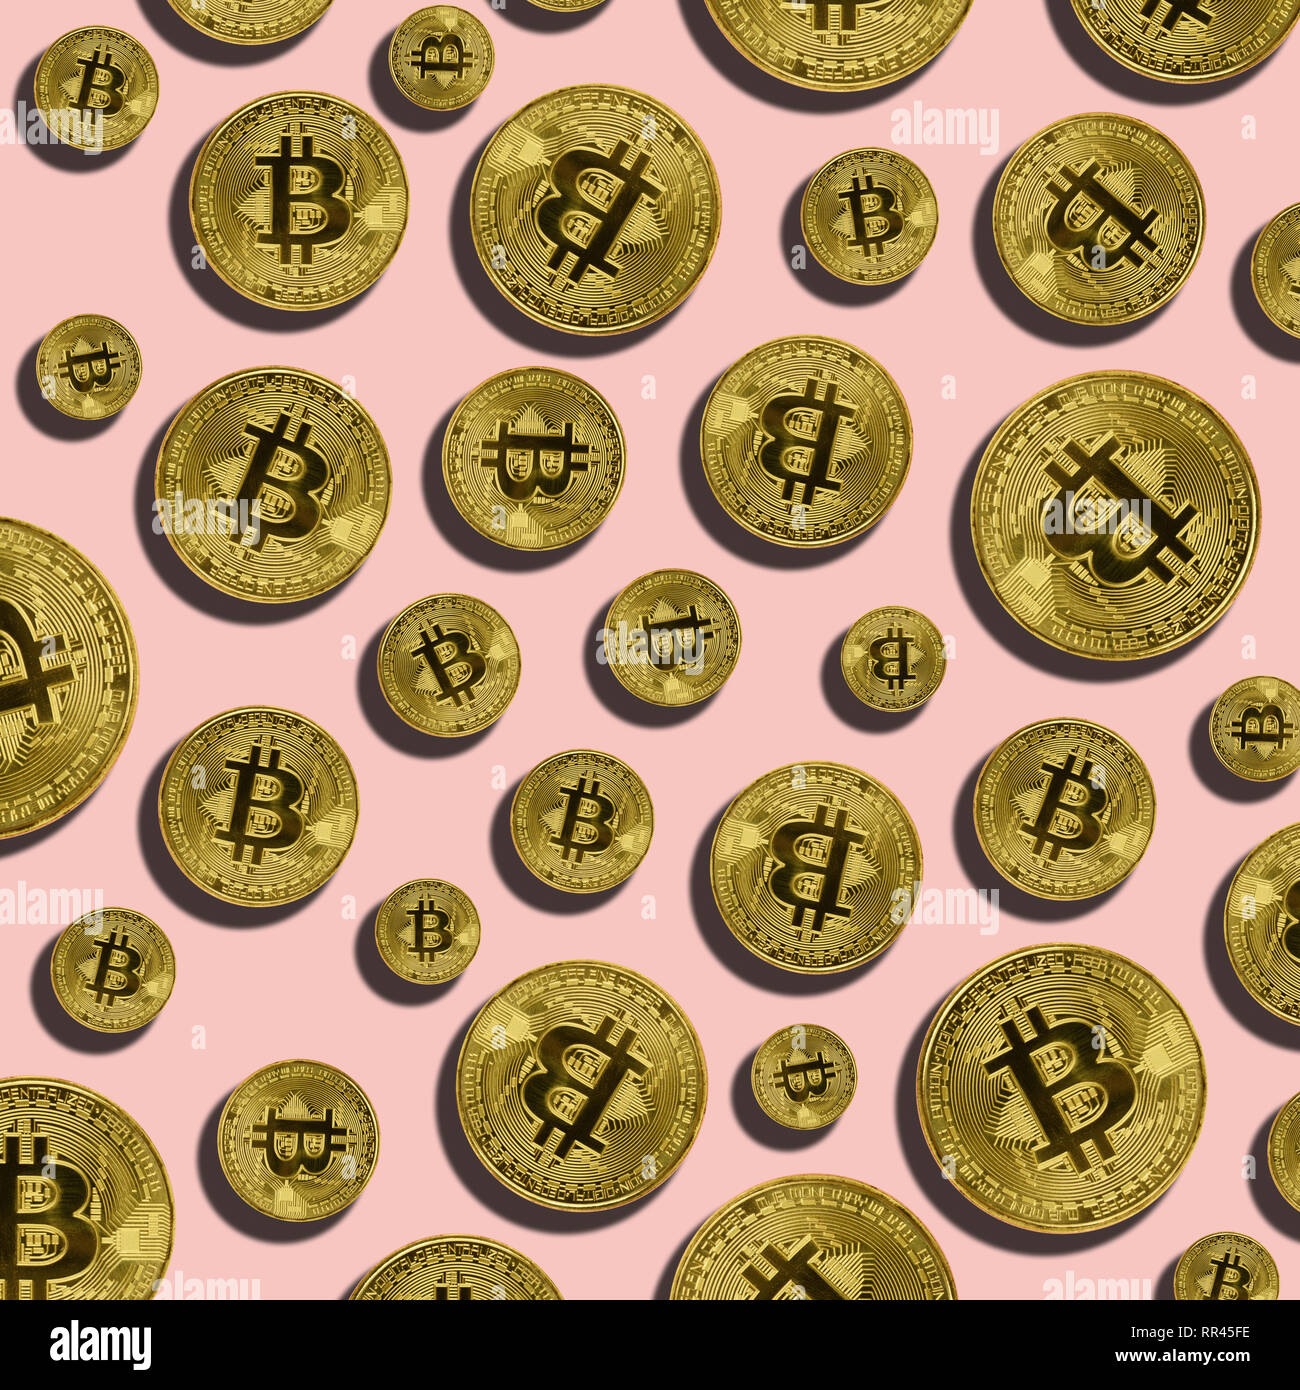 Bitcoin coins with shape on pink background. Bitcoin mining concept Stock Photo